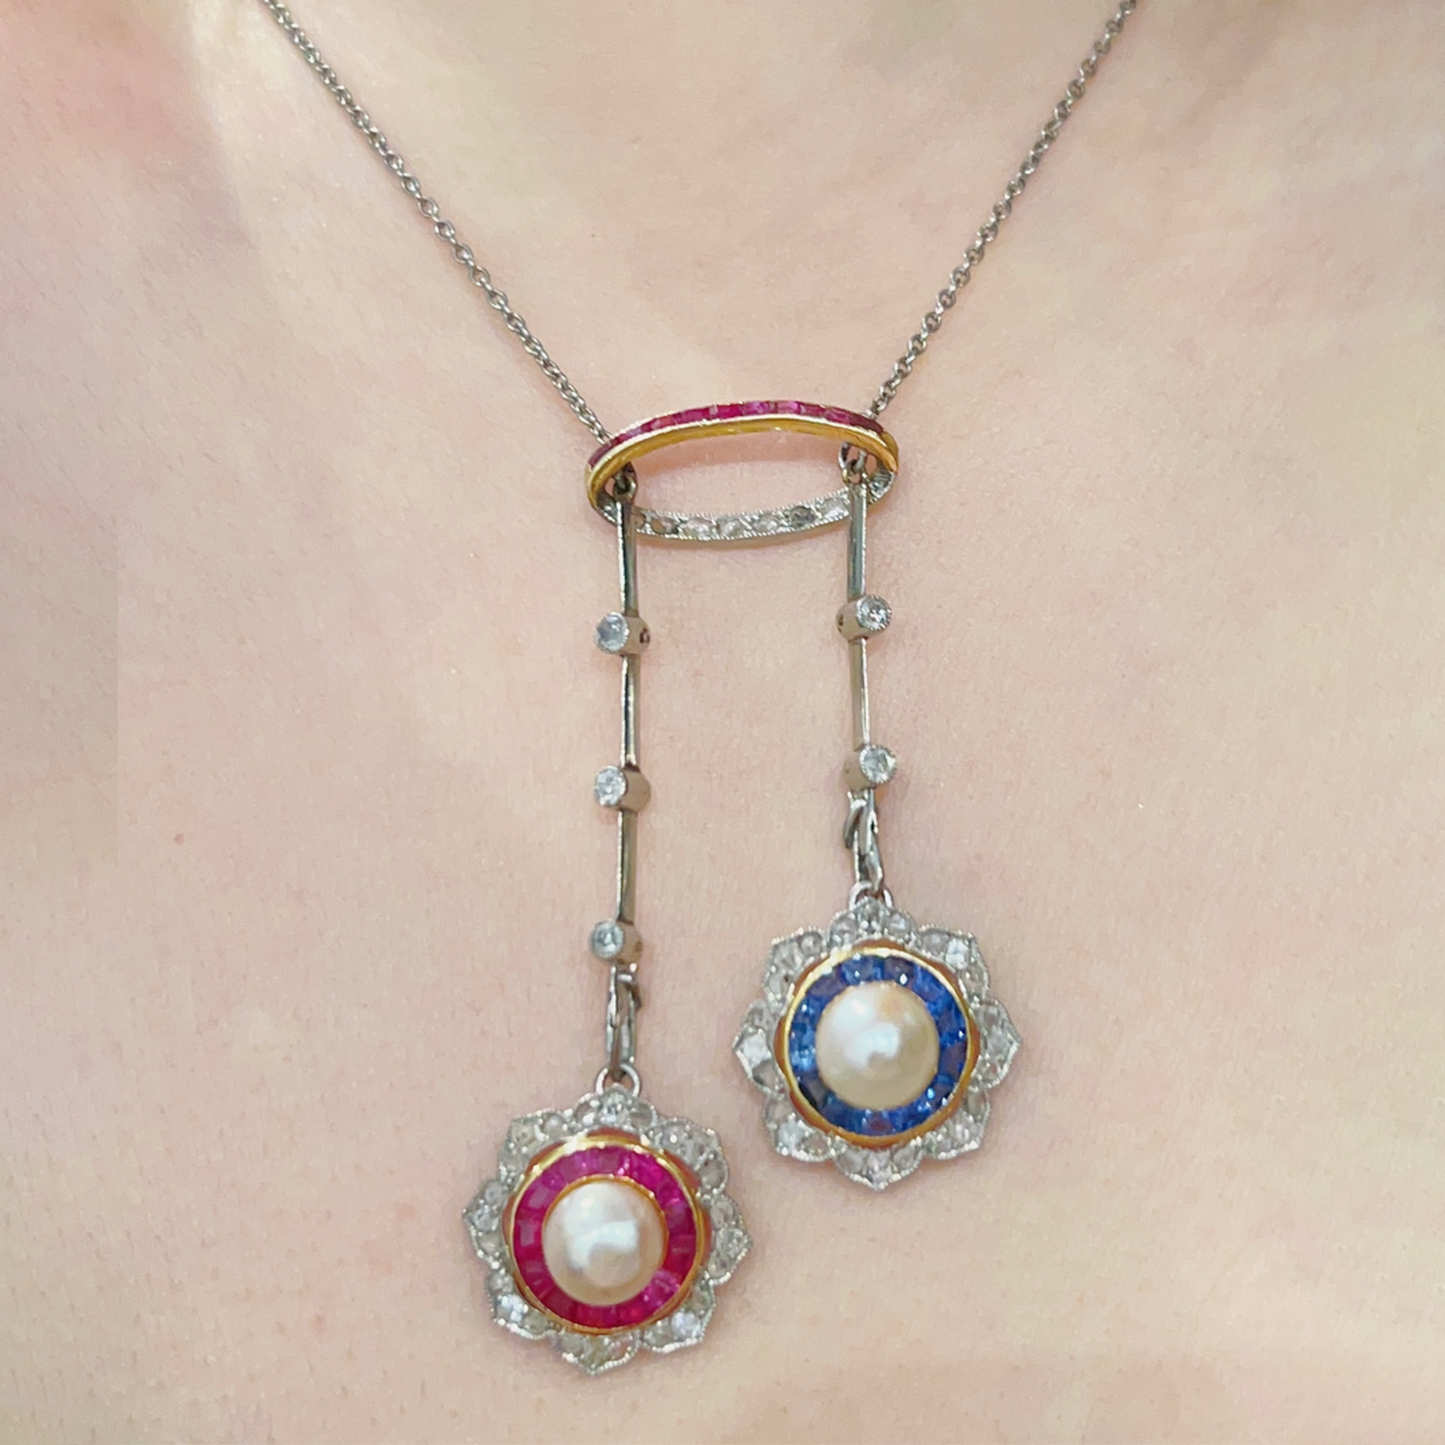 Edwardian Platinum & 18KT Yellow Gold Natural Pearl, Diamond, Ruby & Sapphire Necklace worn on neck